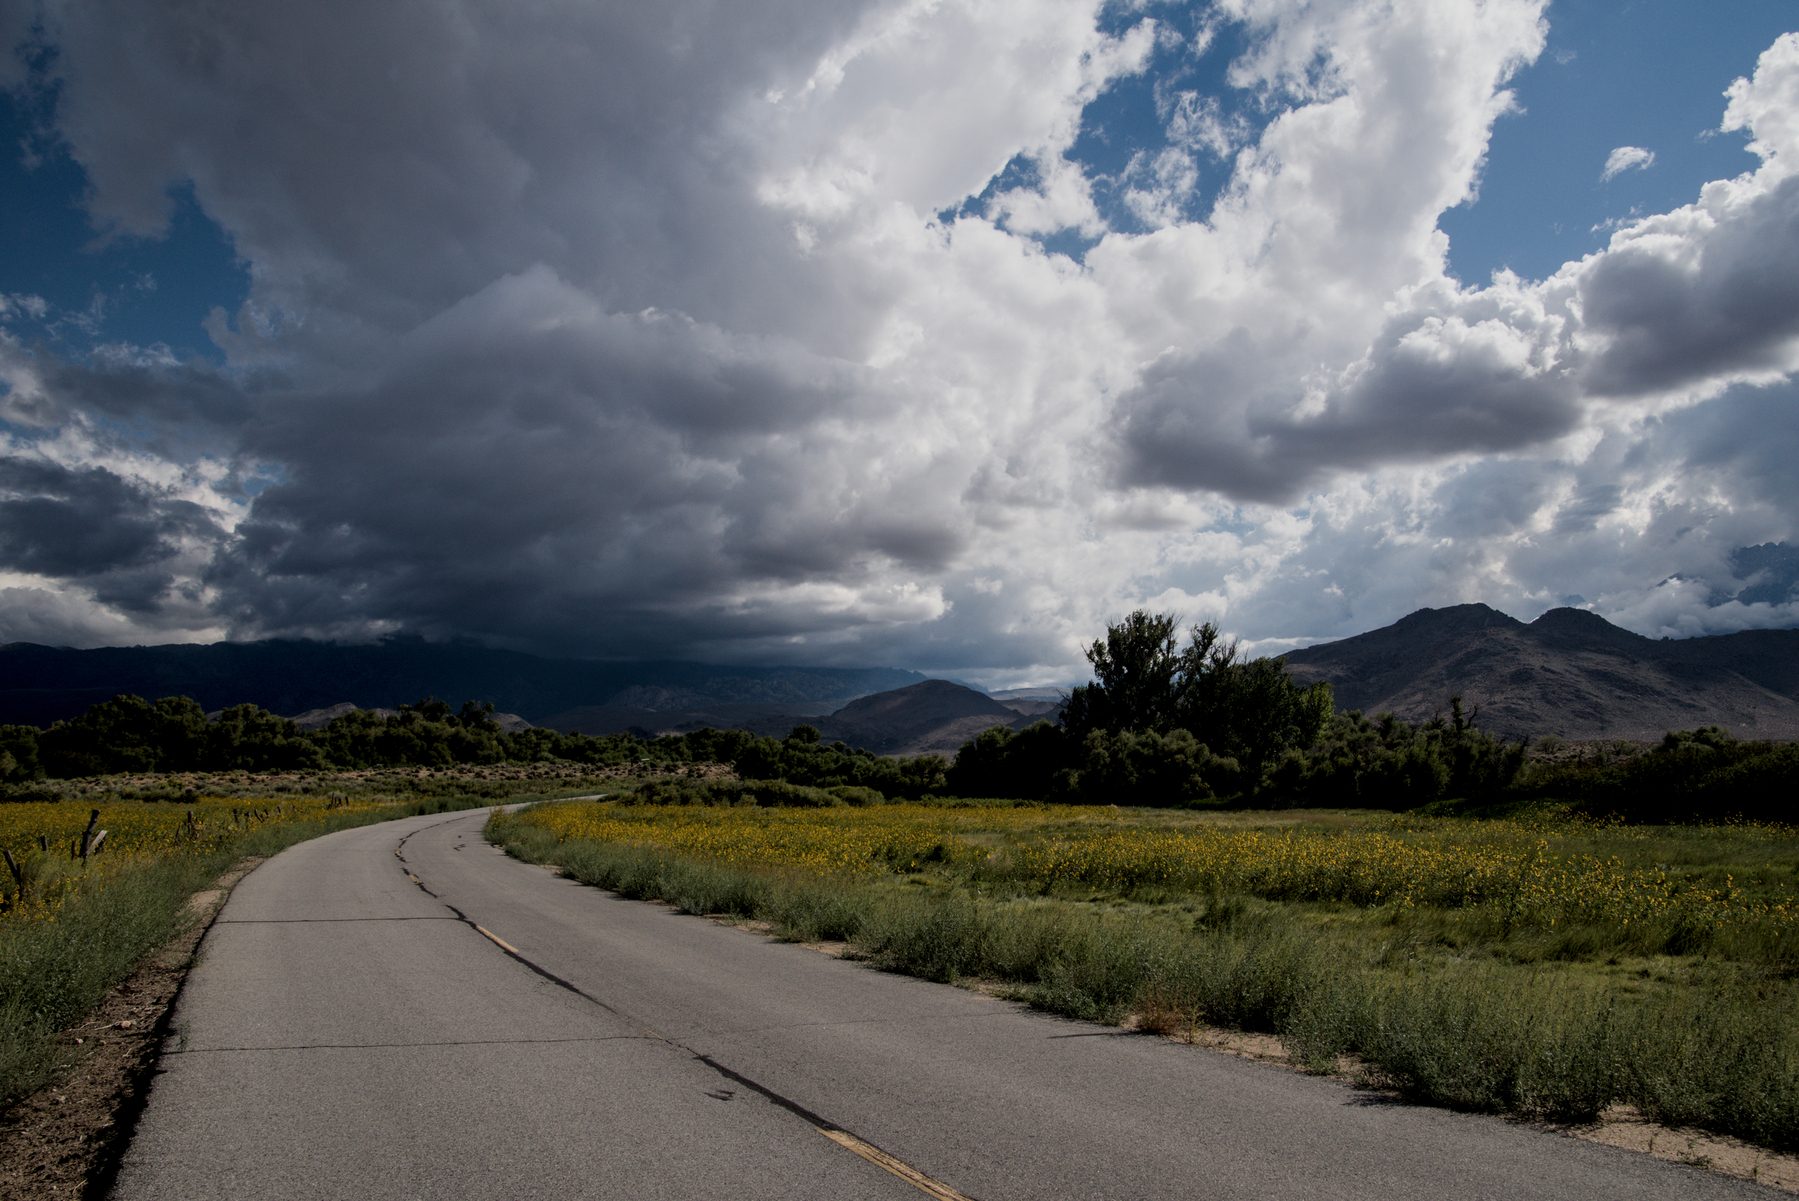 A road runs through a marshy valley full of sunflowers, heading to distant mountains.  Cumulonimbus clouds fill the sky.